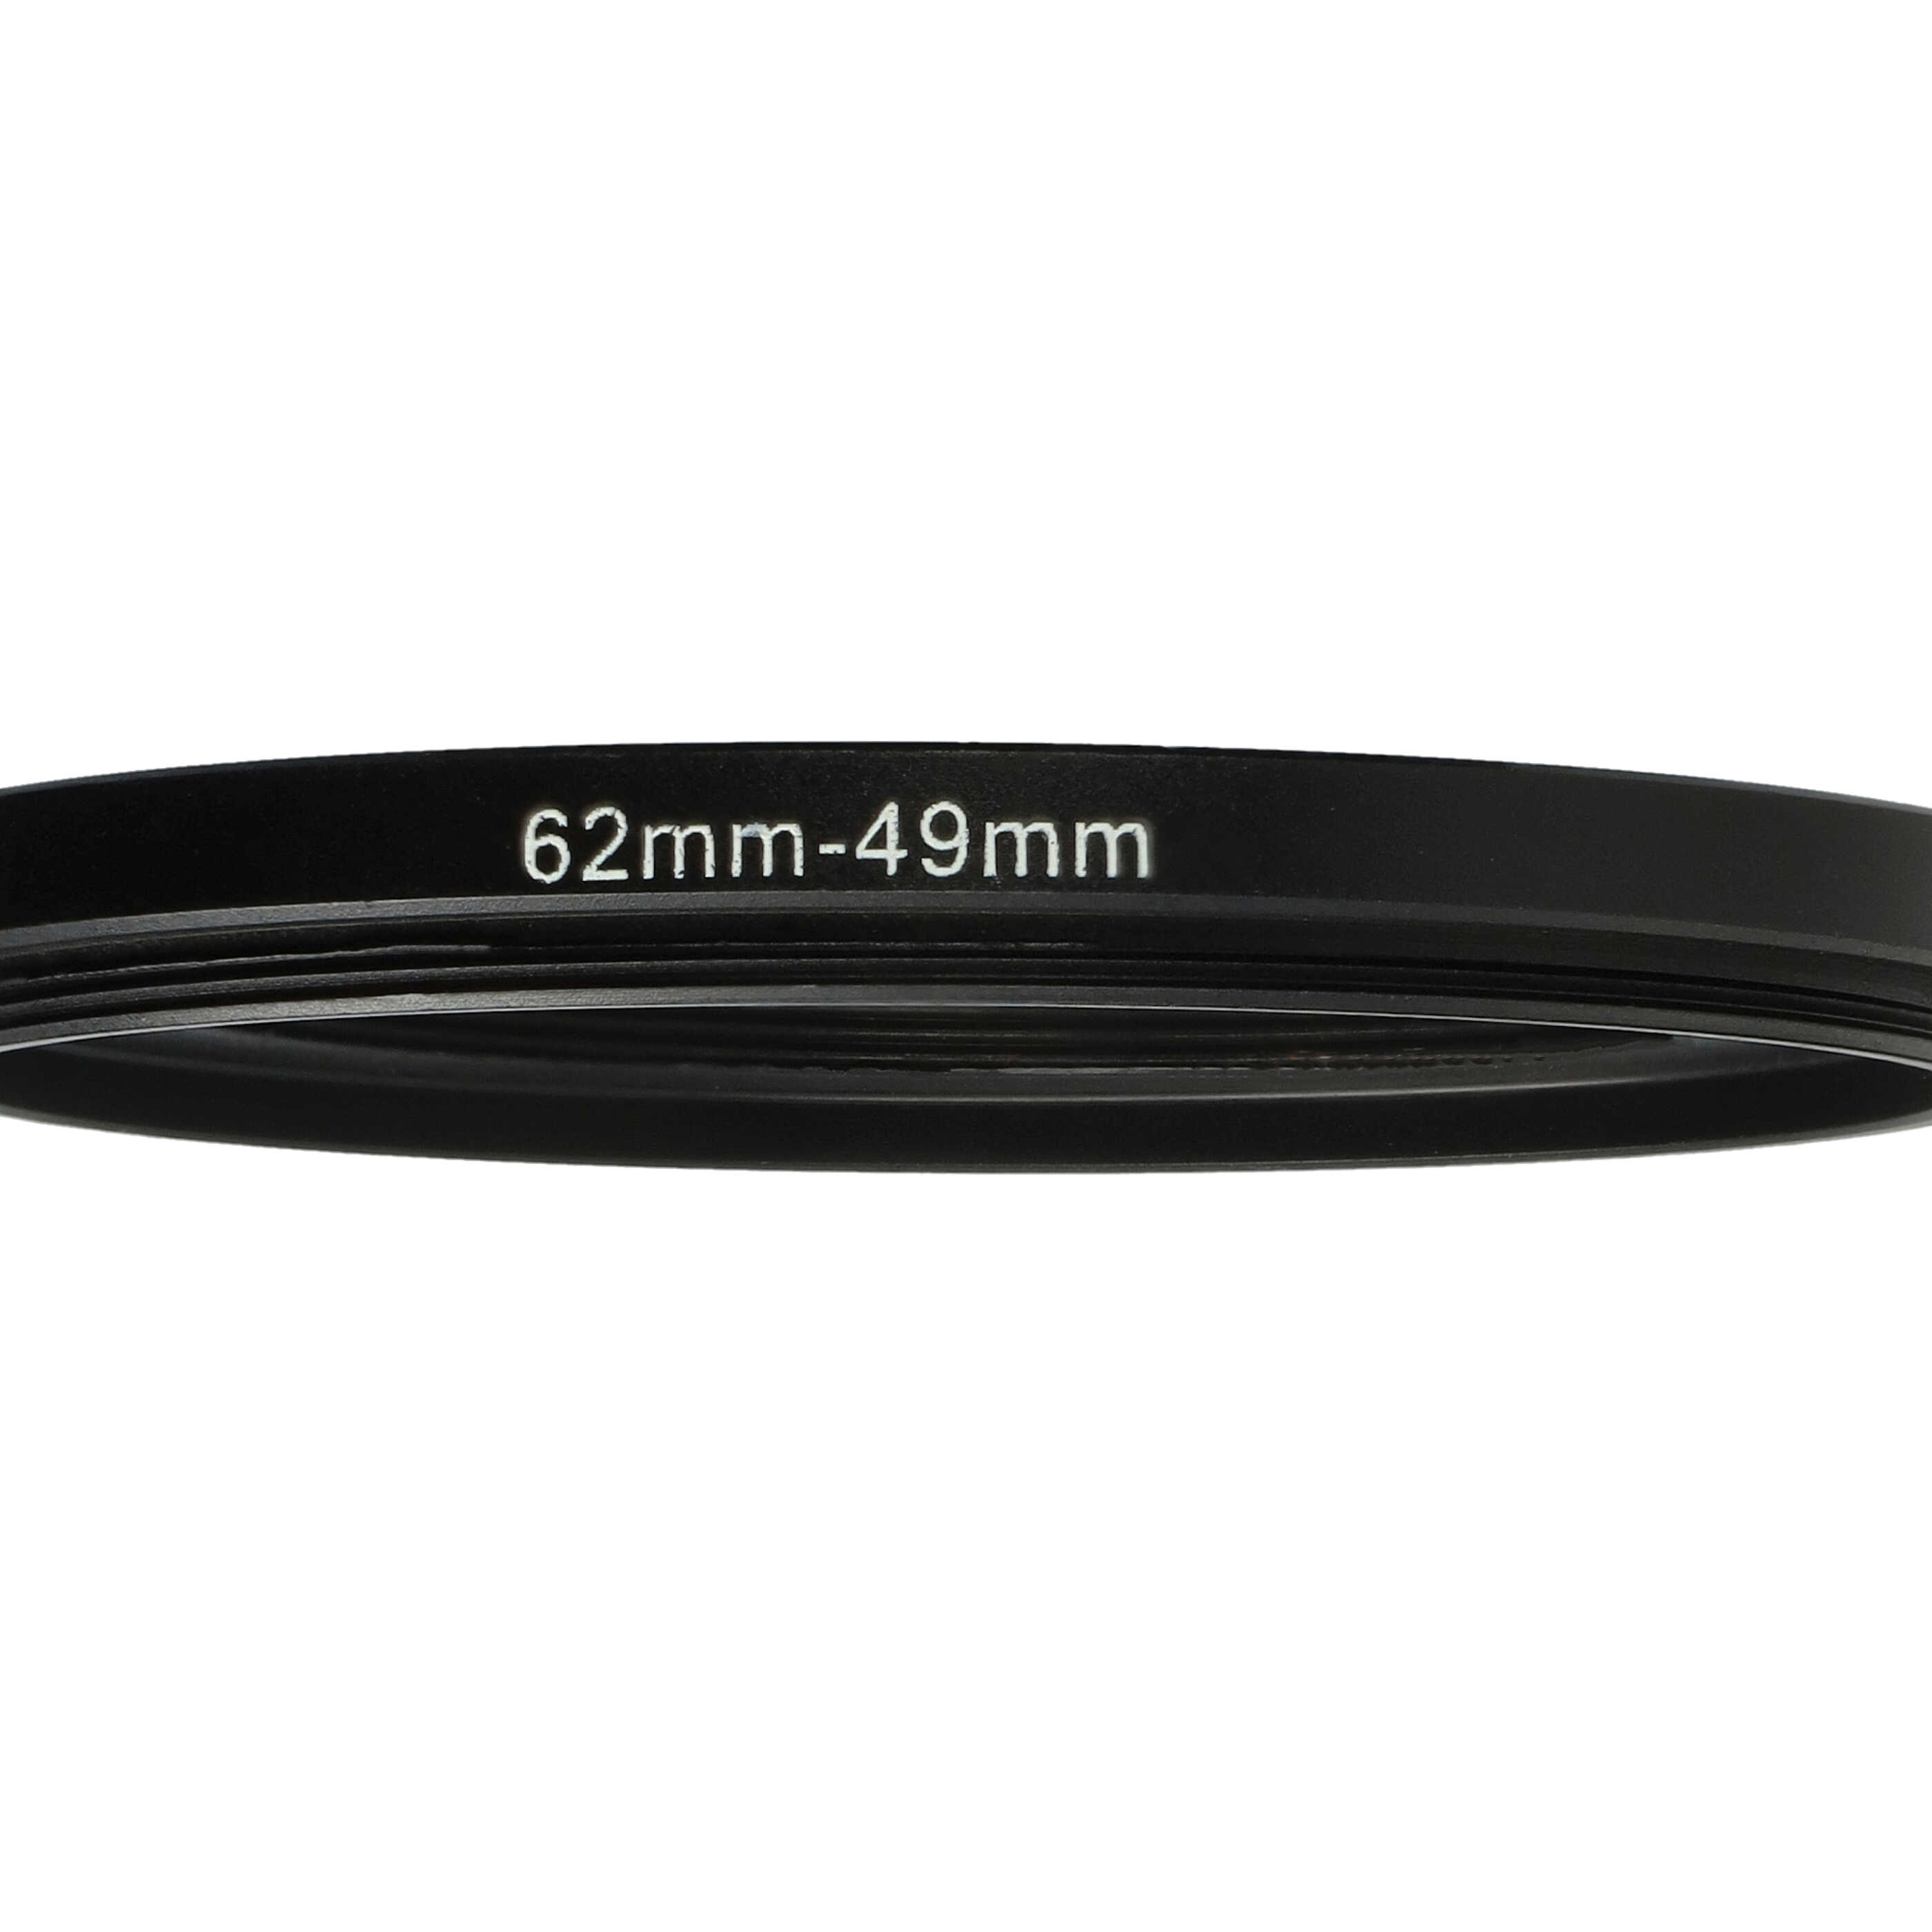 Step-Down Ring Adapter from 62 mm to 49 mm suitable for Camera Lens - Filter Adapter, metal